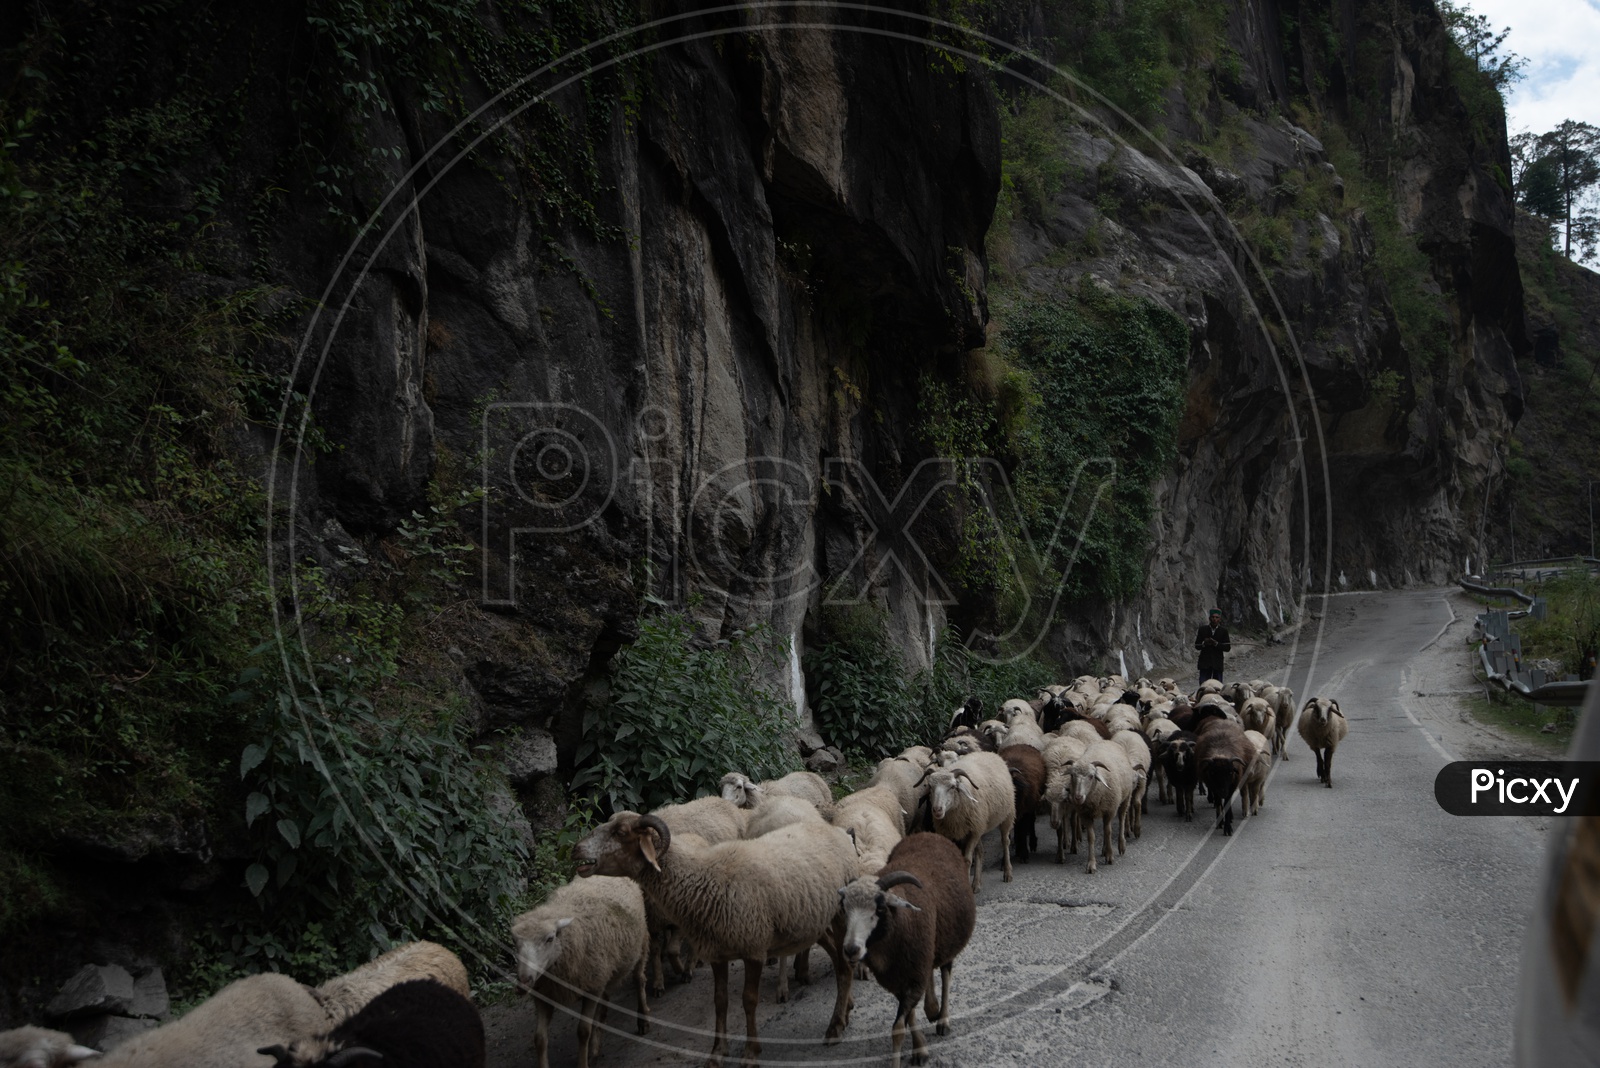 A Shepard With his Flock on roads Of Leh / Ladakh